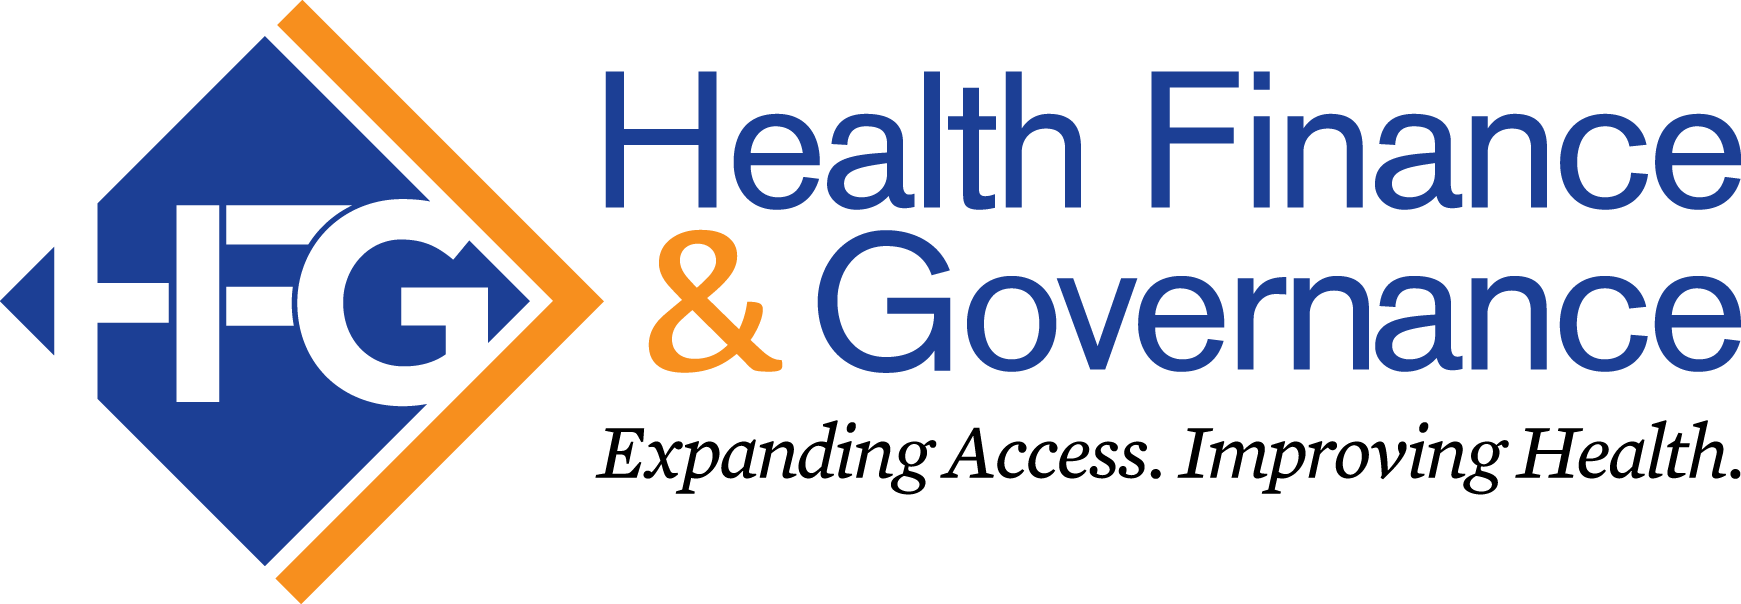 Health Finance And Governance Project (1741x604)